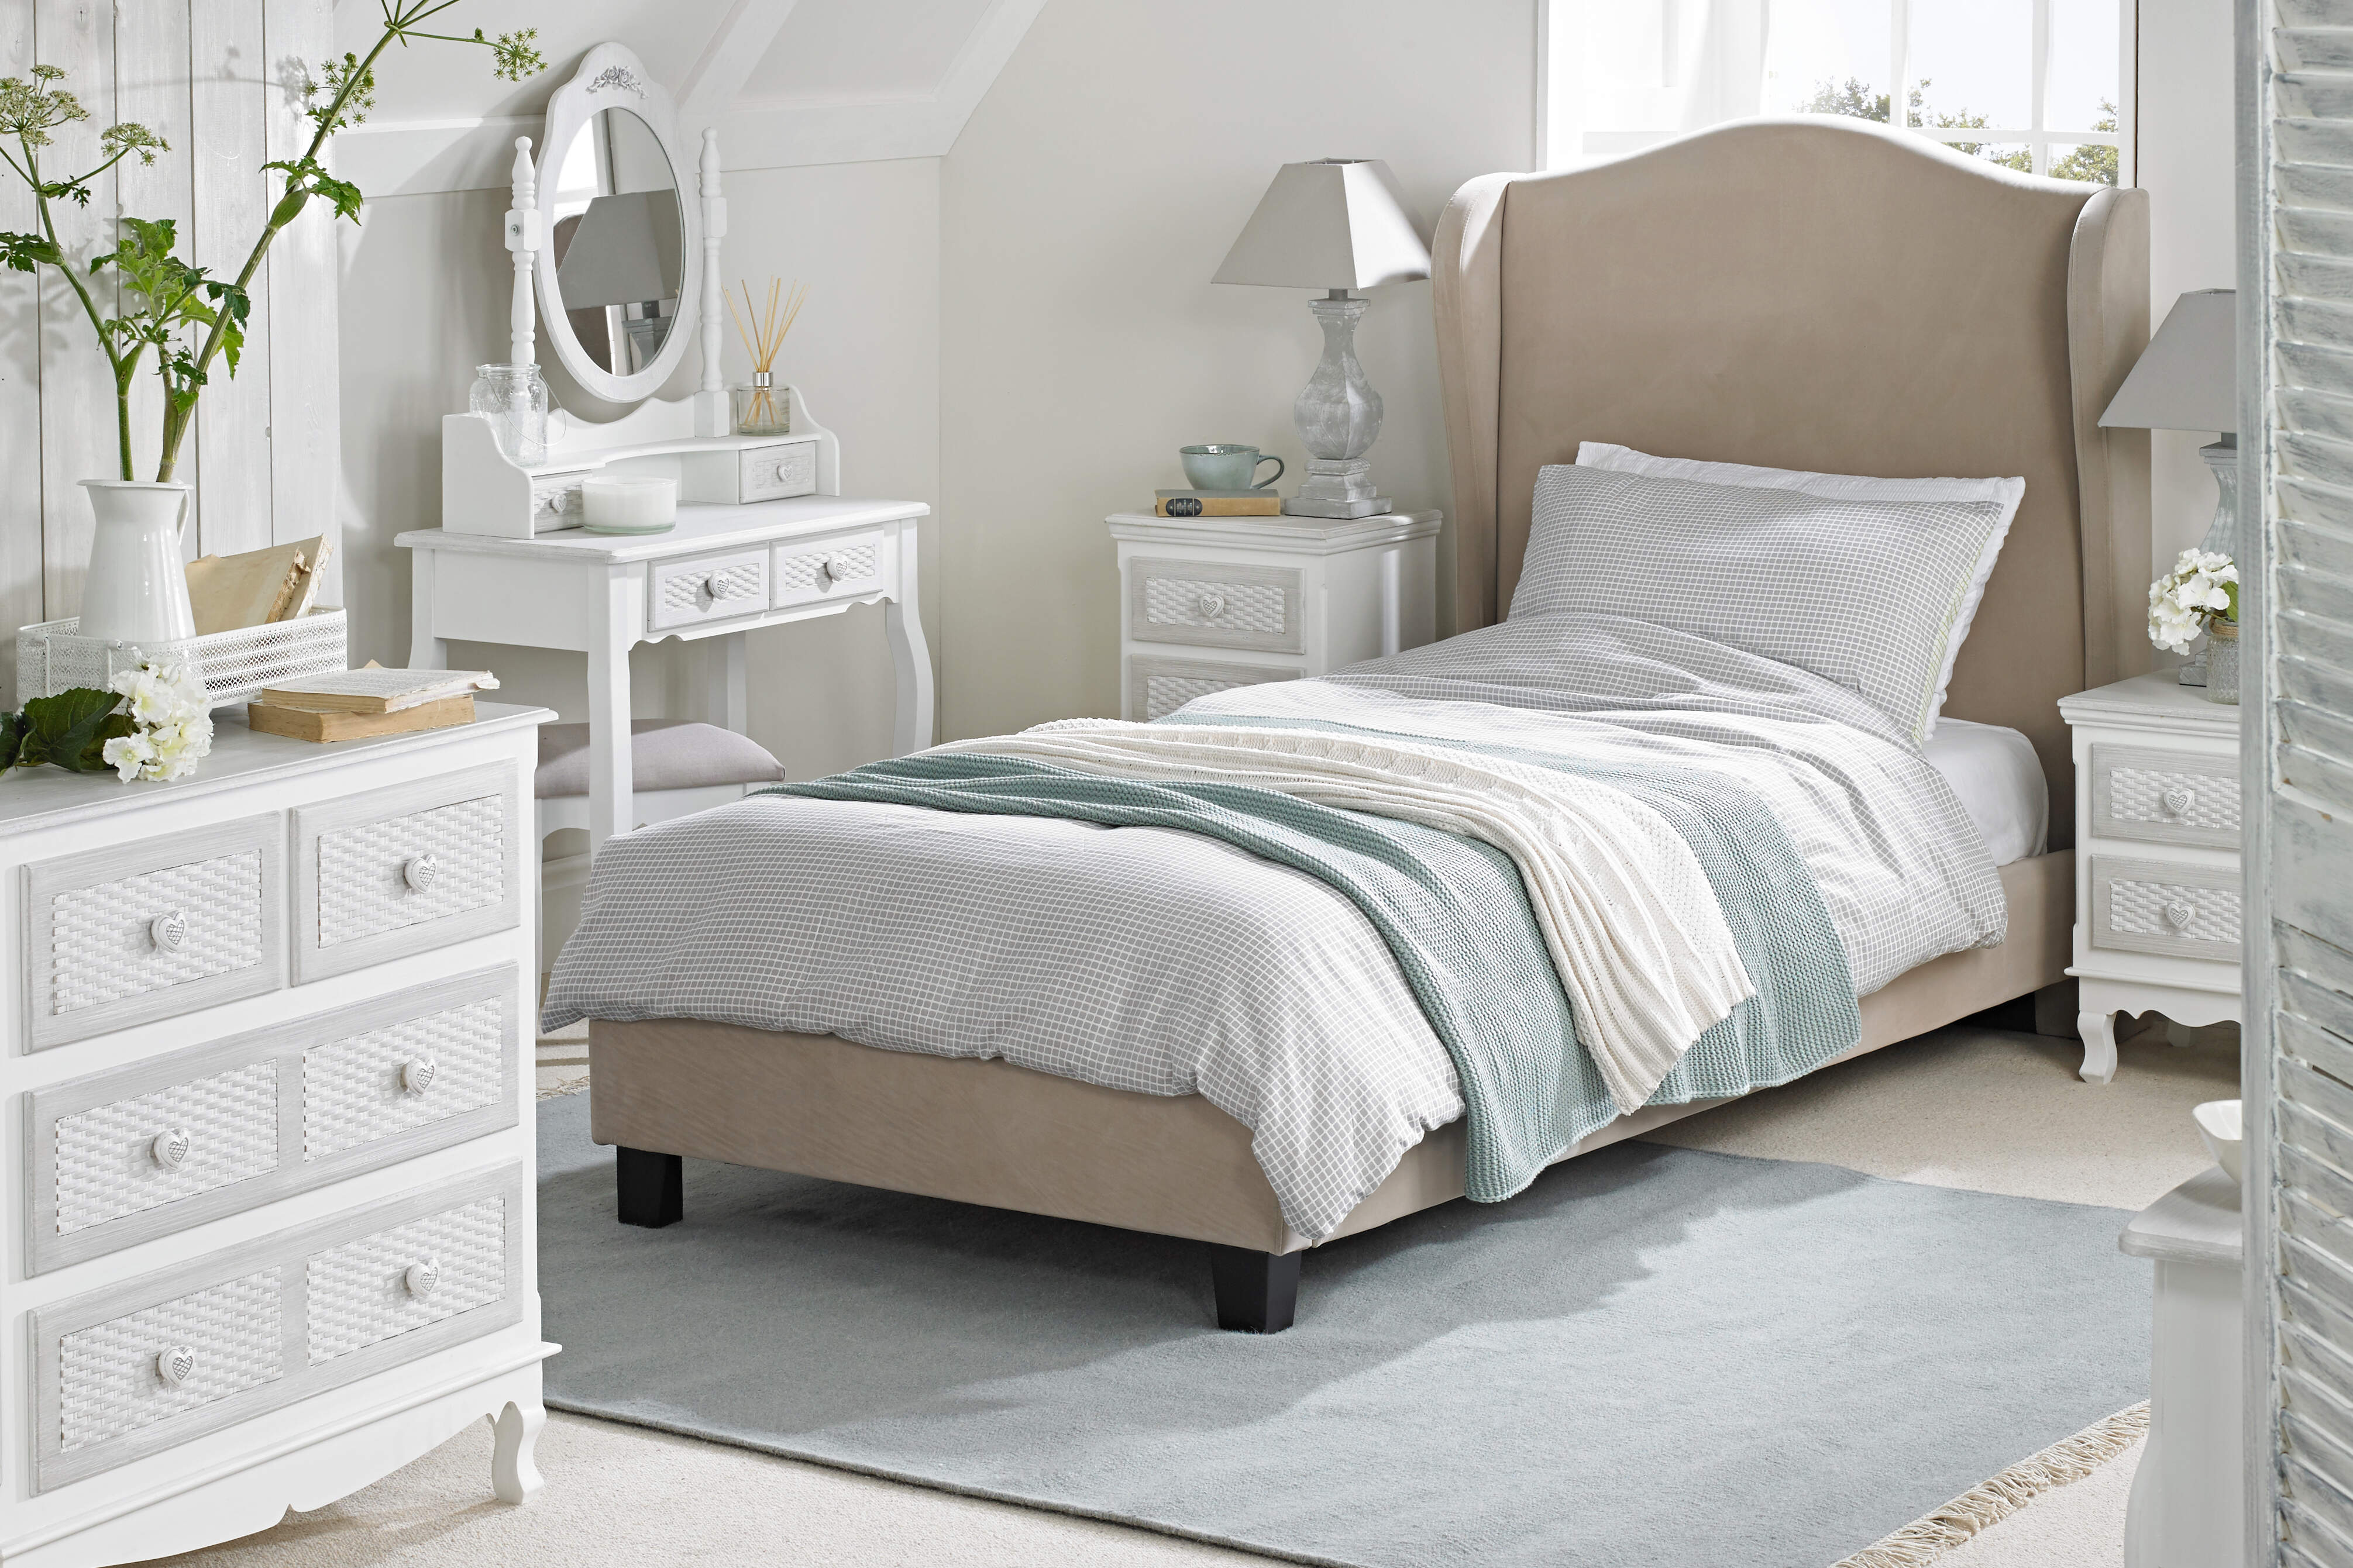 brittany white bedroom furniture